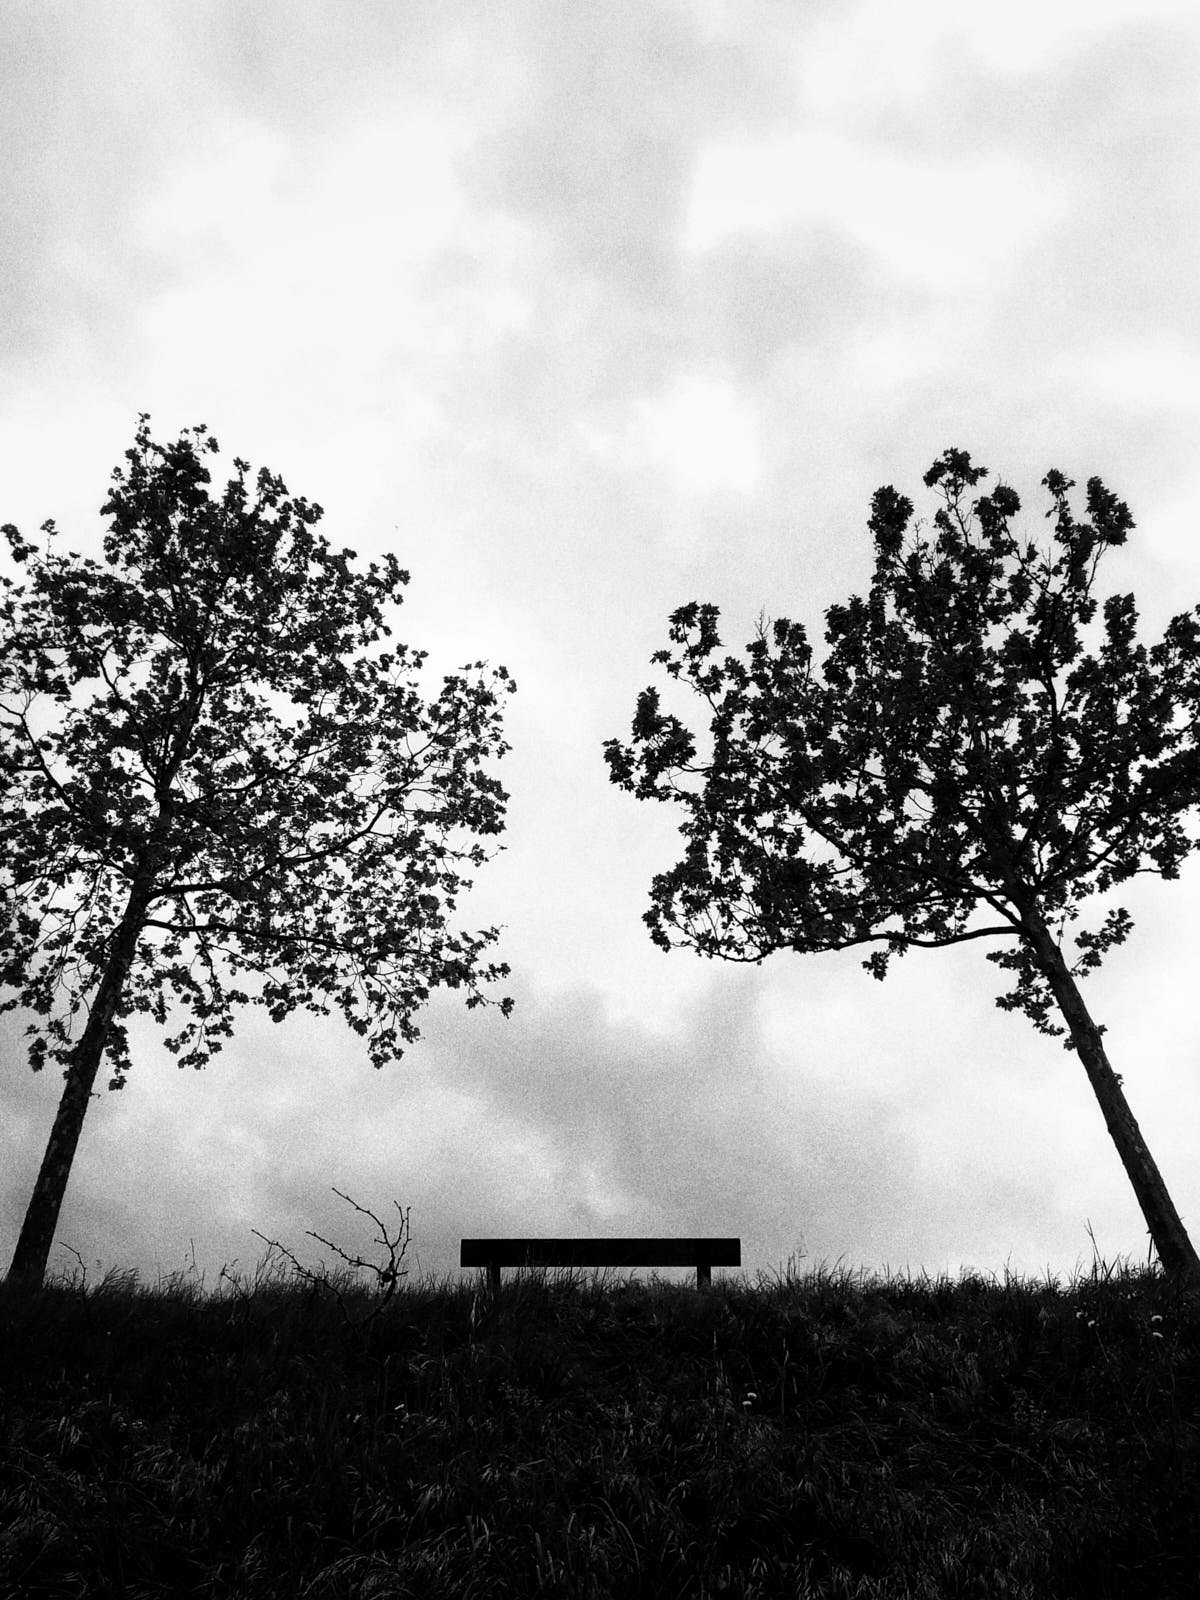 trees and a bench with no one